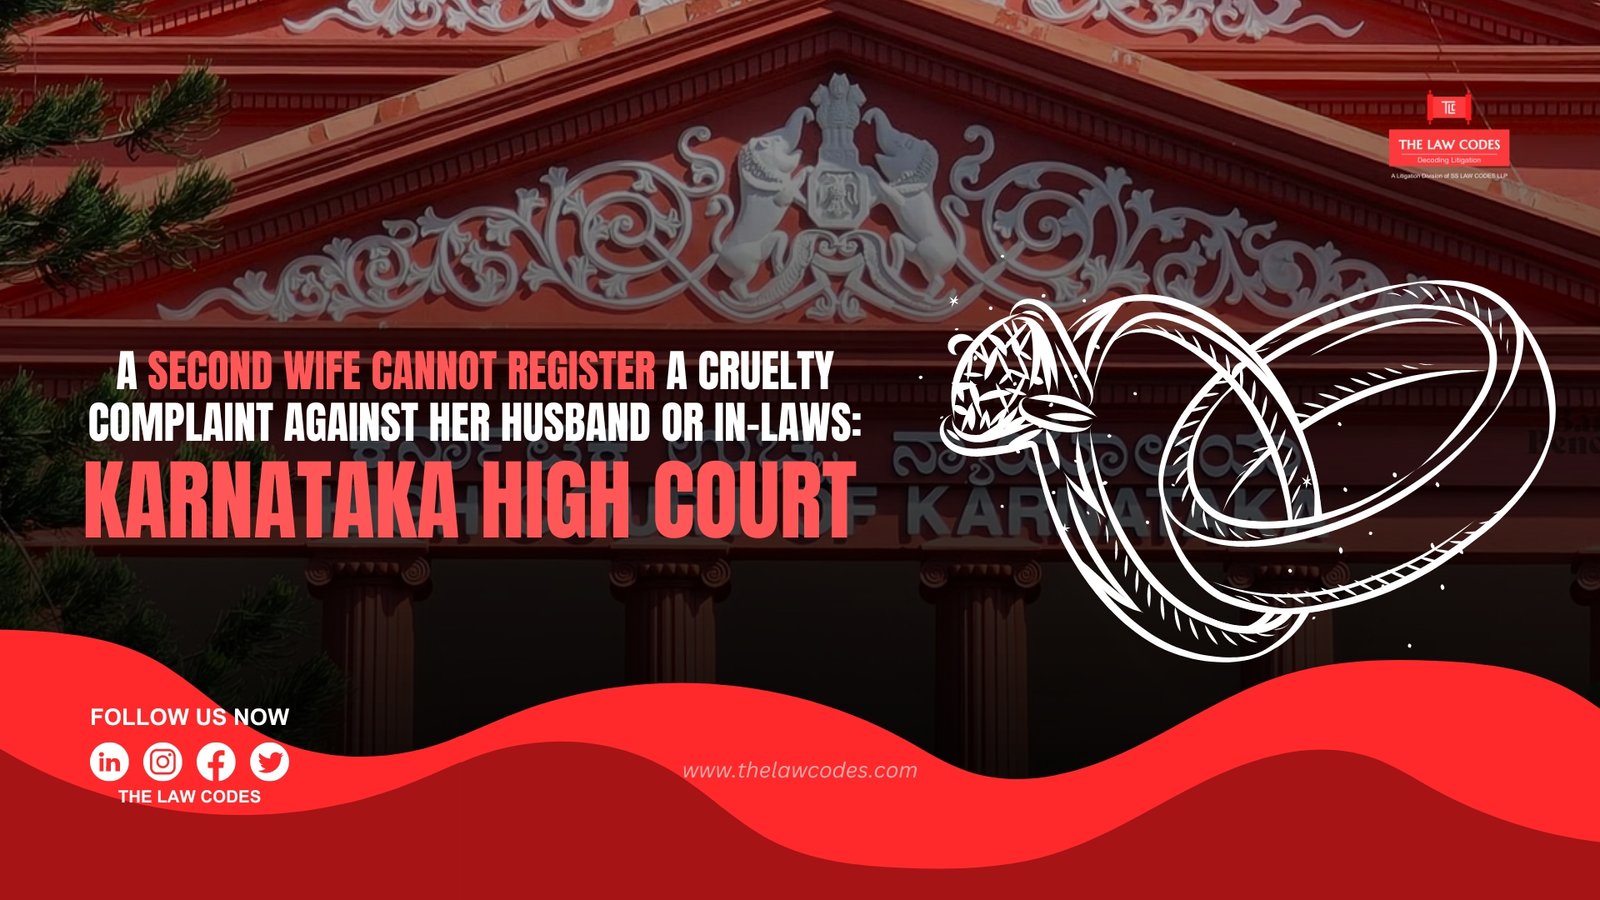 a second wife cannot register a cruelty complaint against her husband or in-laws.